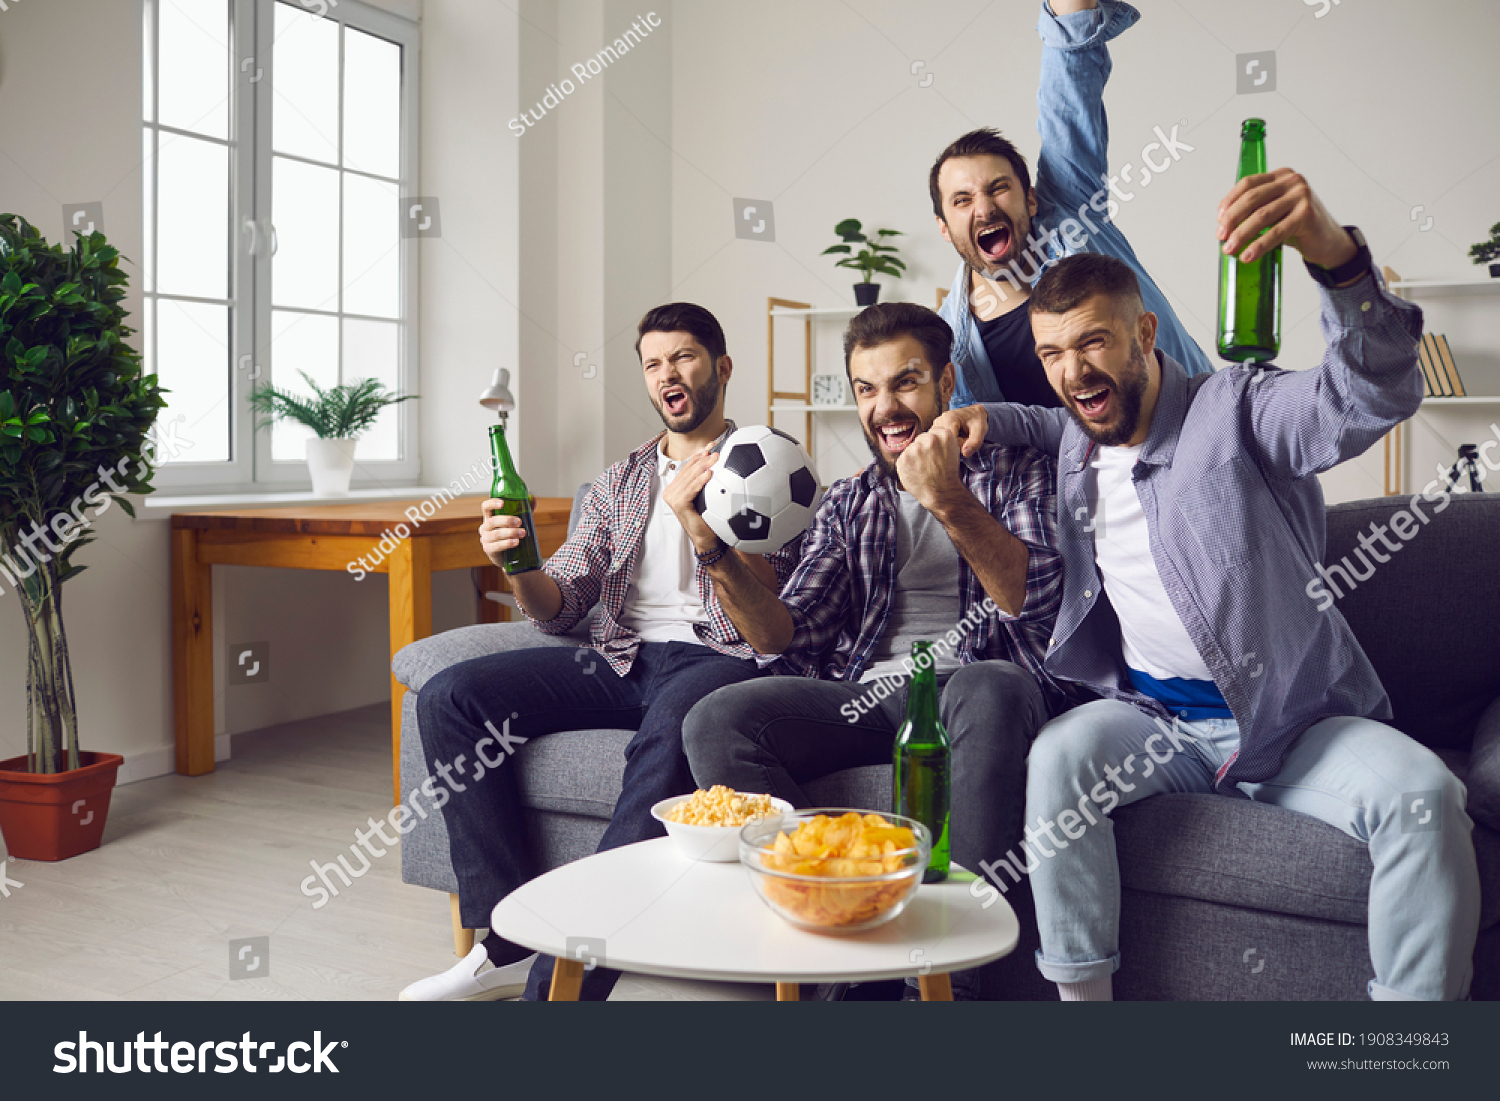 Group of excited men friends football fans feeling happy and celebrating favourite teams goal drinking beer and eating snacks during watching television match at home. Entertainment for male company #1908349843